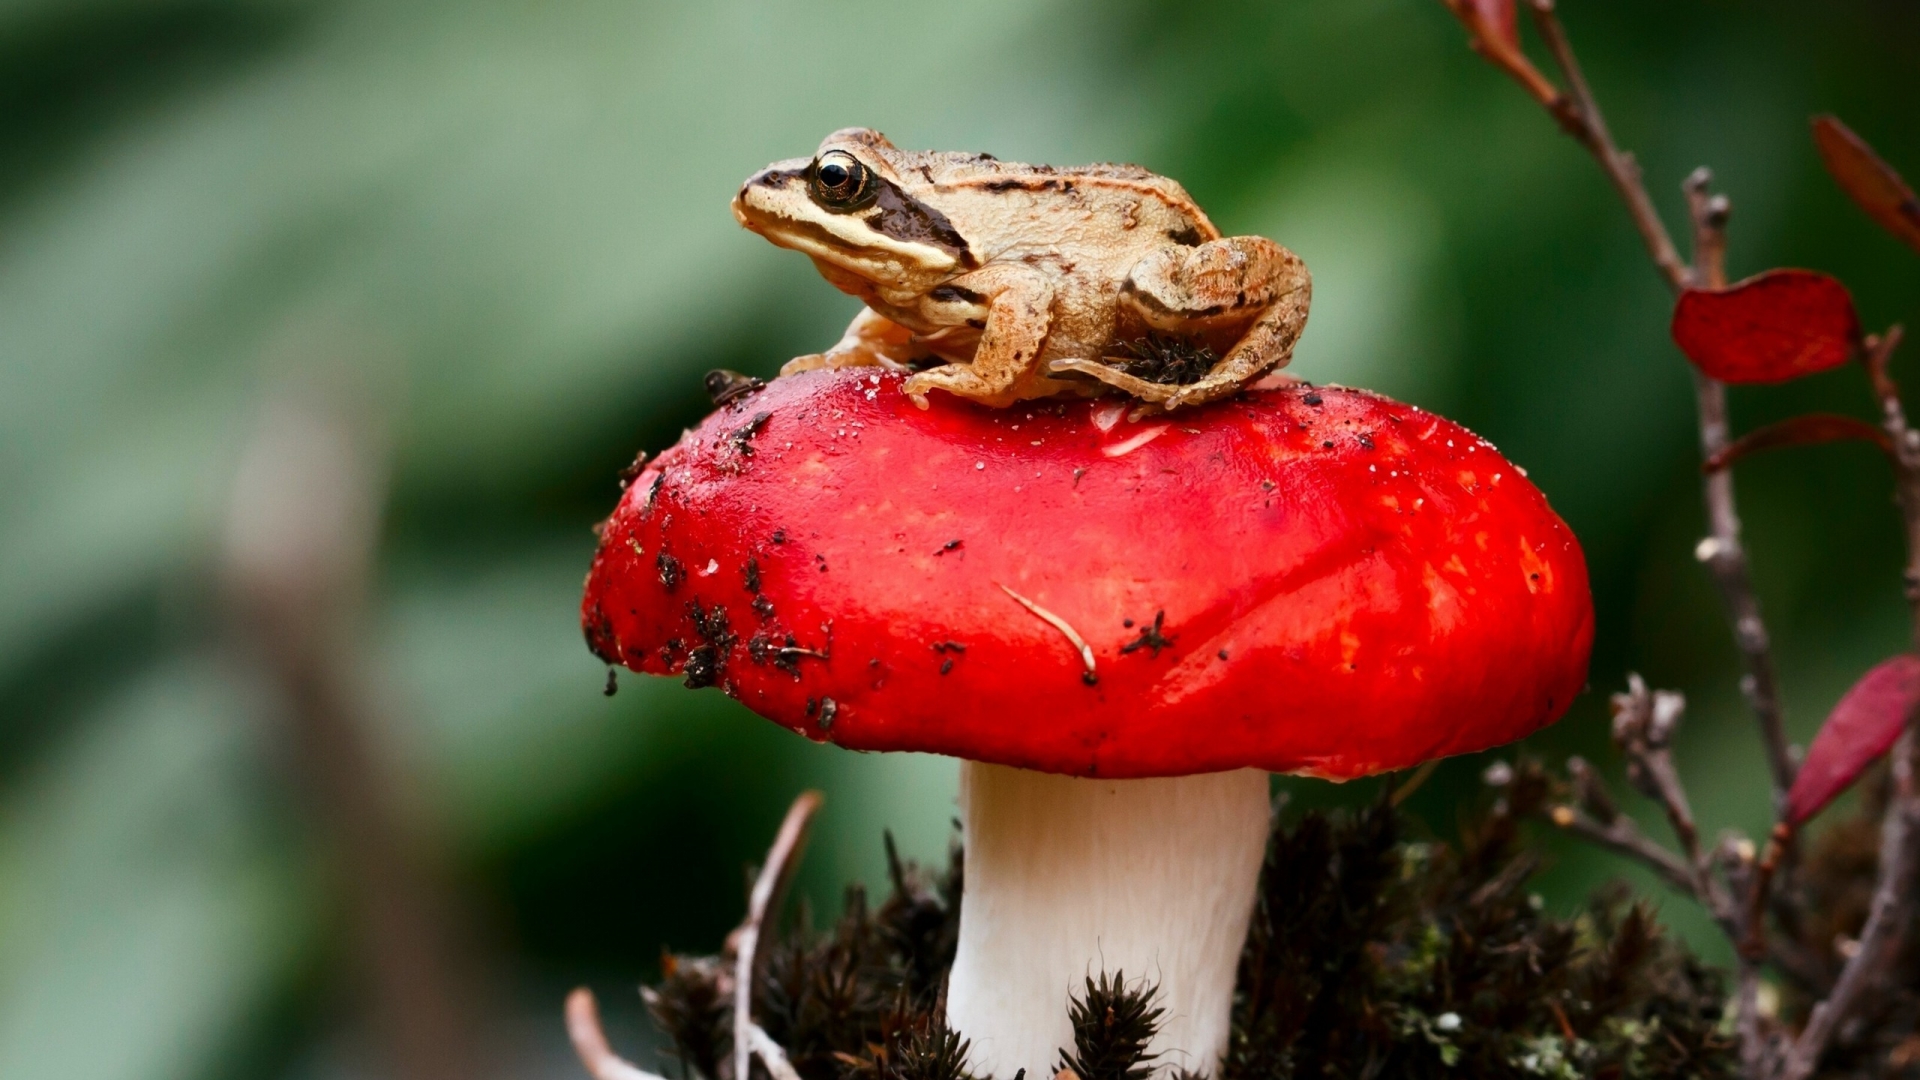 Frog Sitting on a Red Mushroom for 1920 x 1080 HDTV 1080p resolution